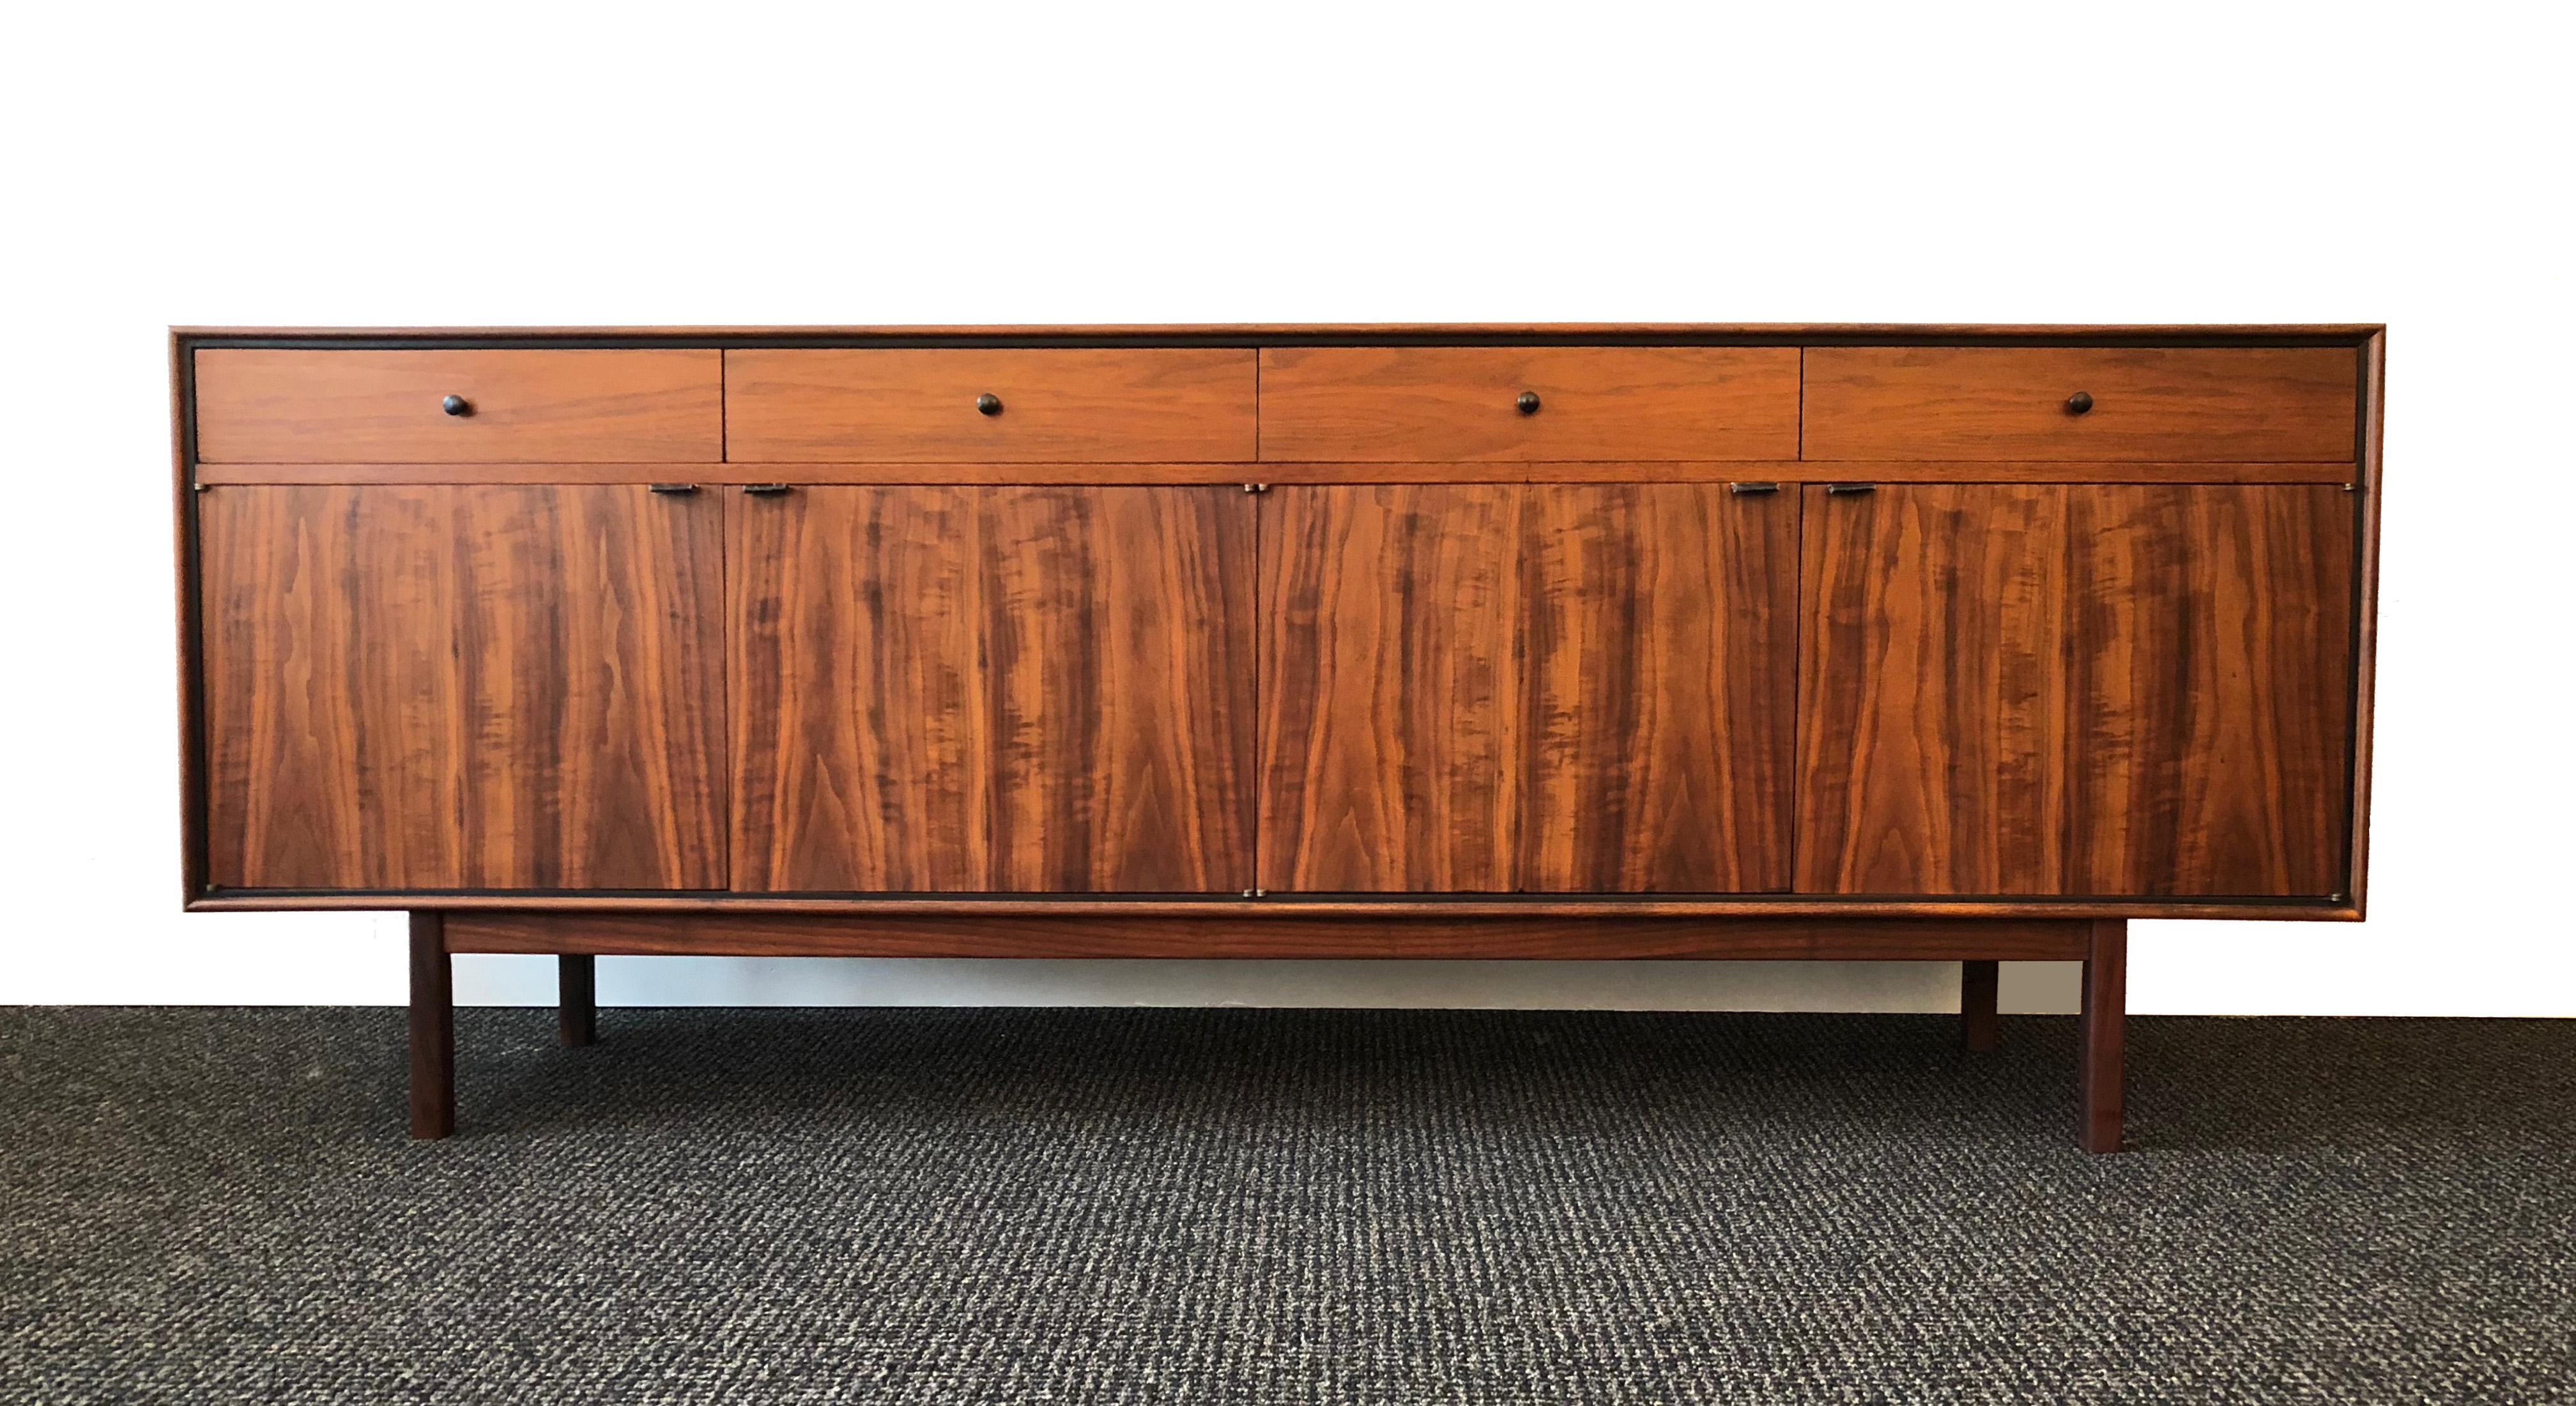 A beautifully-grained Mid-Century Modern credenza by Milo Baughman for Arch Gordon, 1950s.

The walnut cabinet and drawers handsomely contrast with the rosewood doors and base, offset by ebonized black detail and original black leather door pulls.